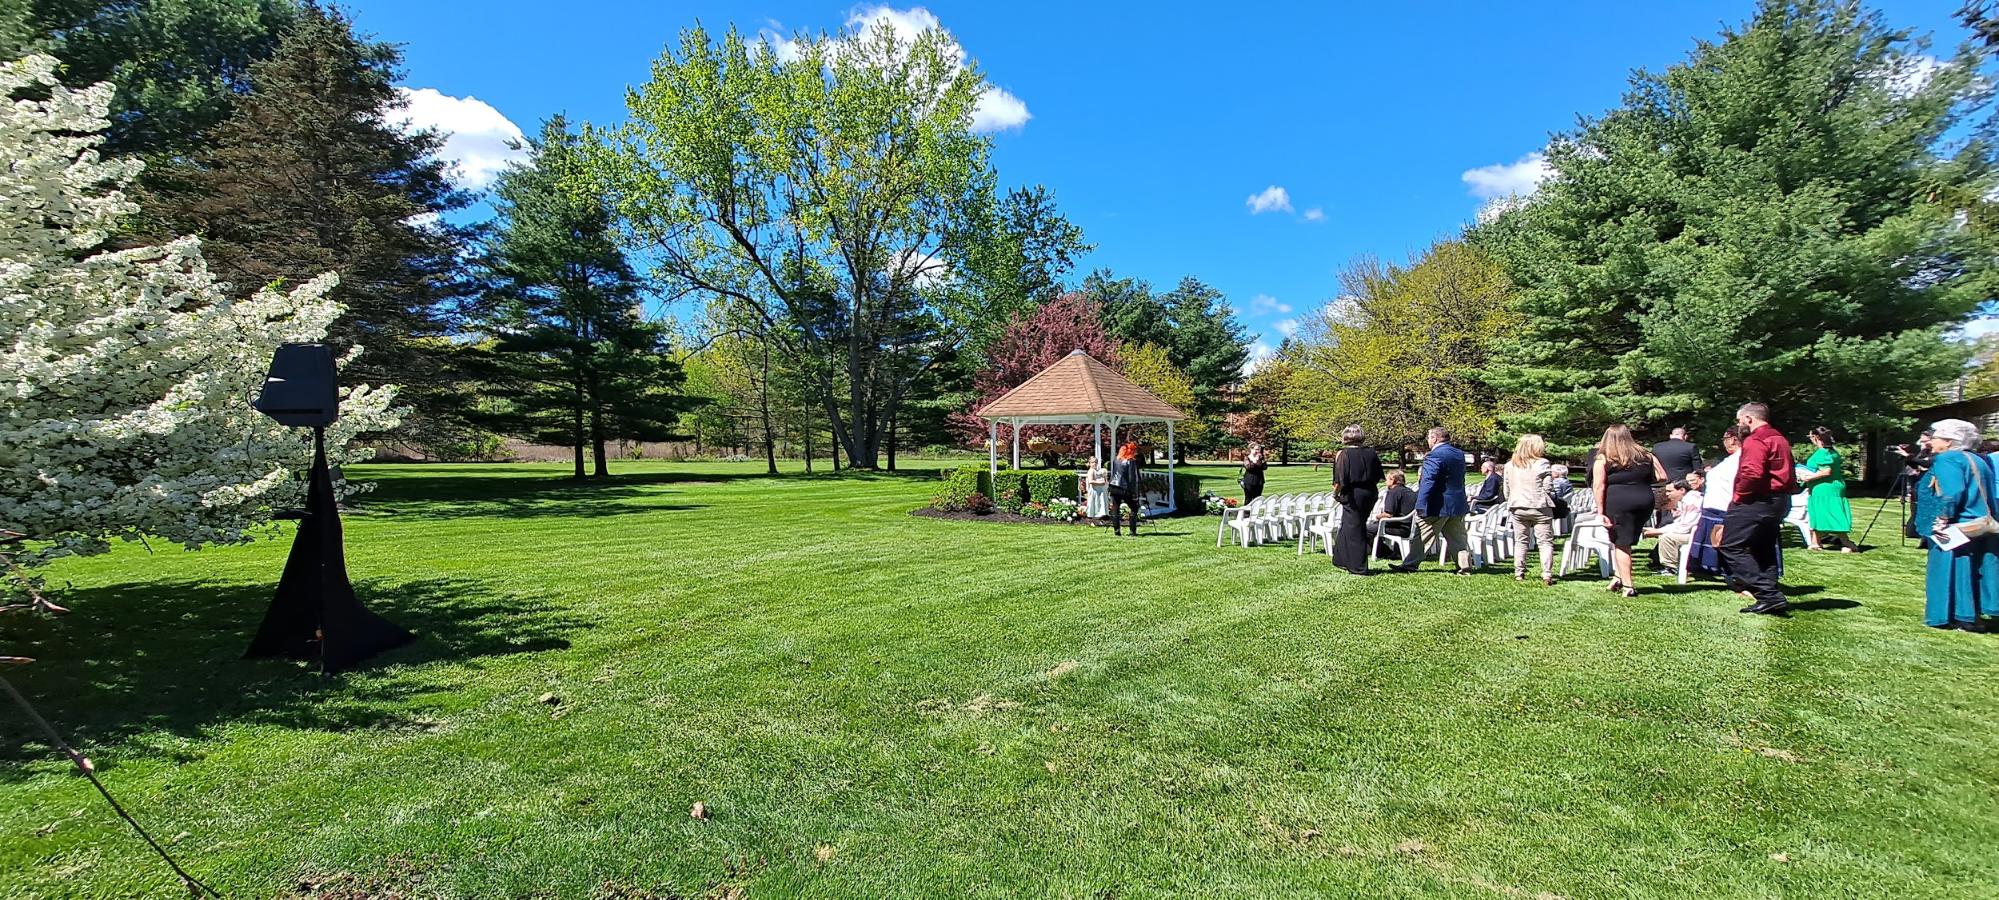 This is an example of my wedding ceremony setup. I apologize for the glare. I try to have a small footprint and you can see in the next picture I set up out of the way of your wedding photos. The is at "Colden Manor at Spruce Lodge" on a beautiful Saturday in May.